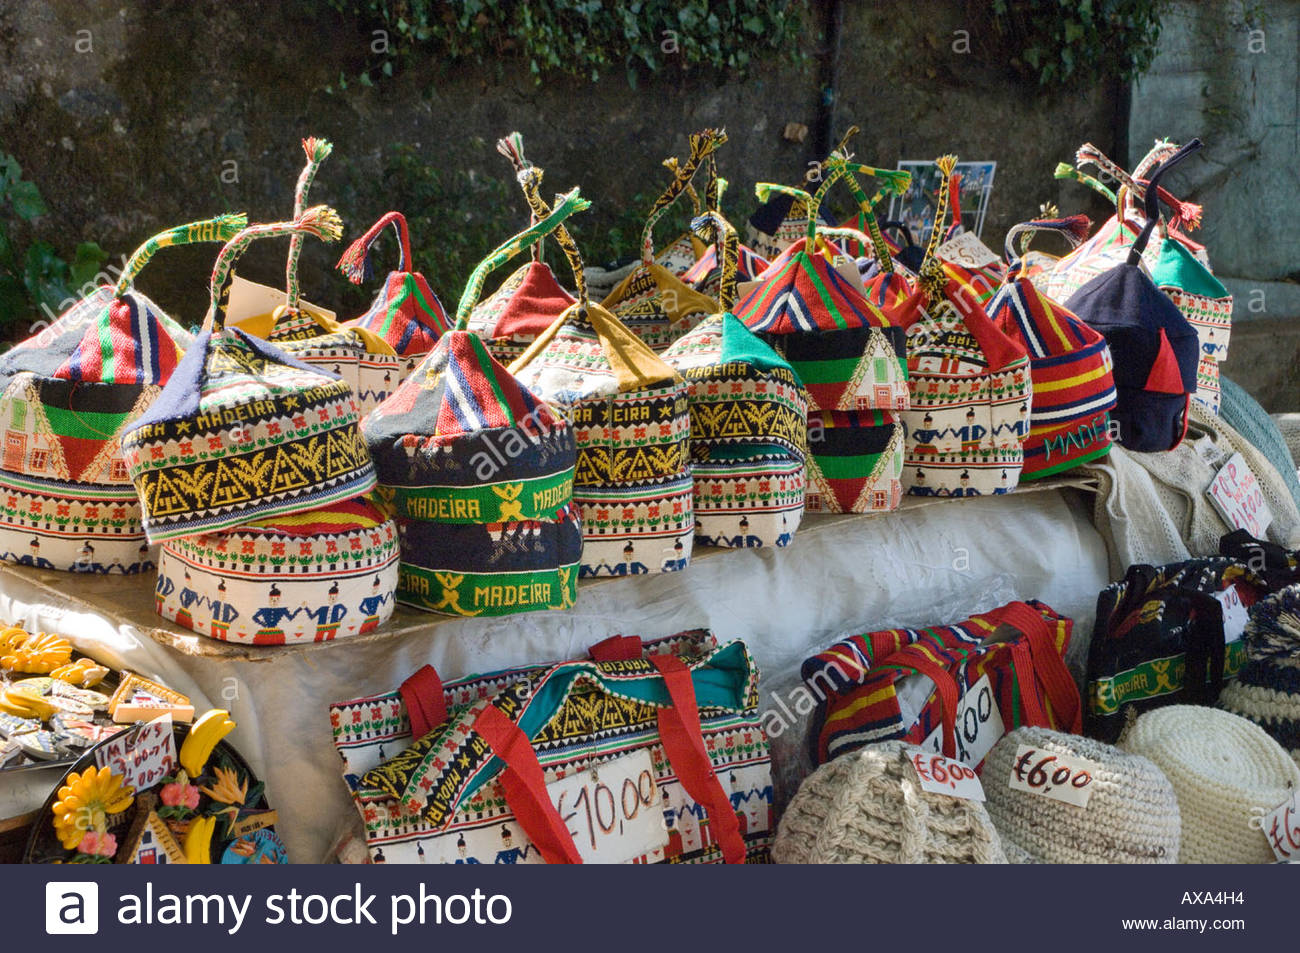 portugal-madeira-traditional-hats-on-sale-at-a-souvenir-stall-at-monte-AXA4H4.jpg